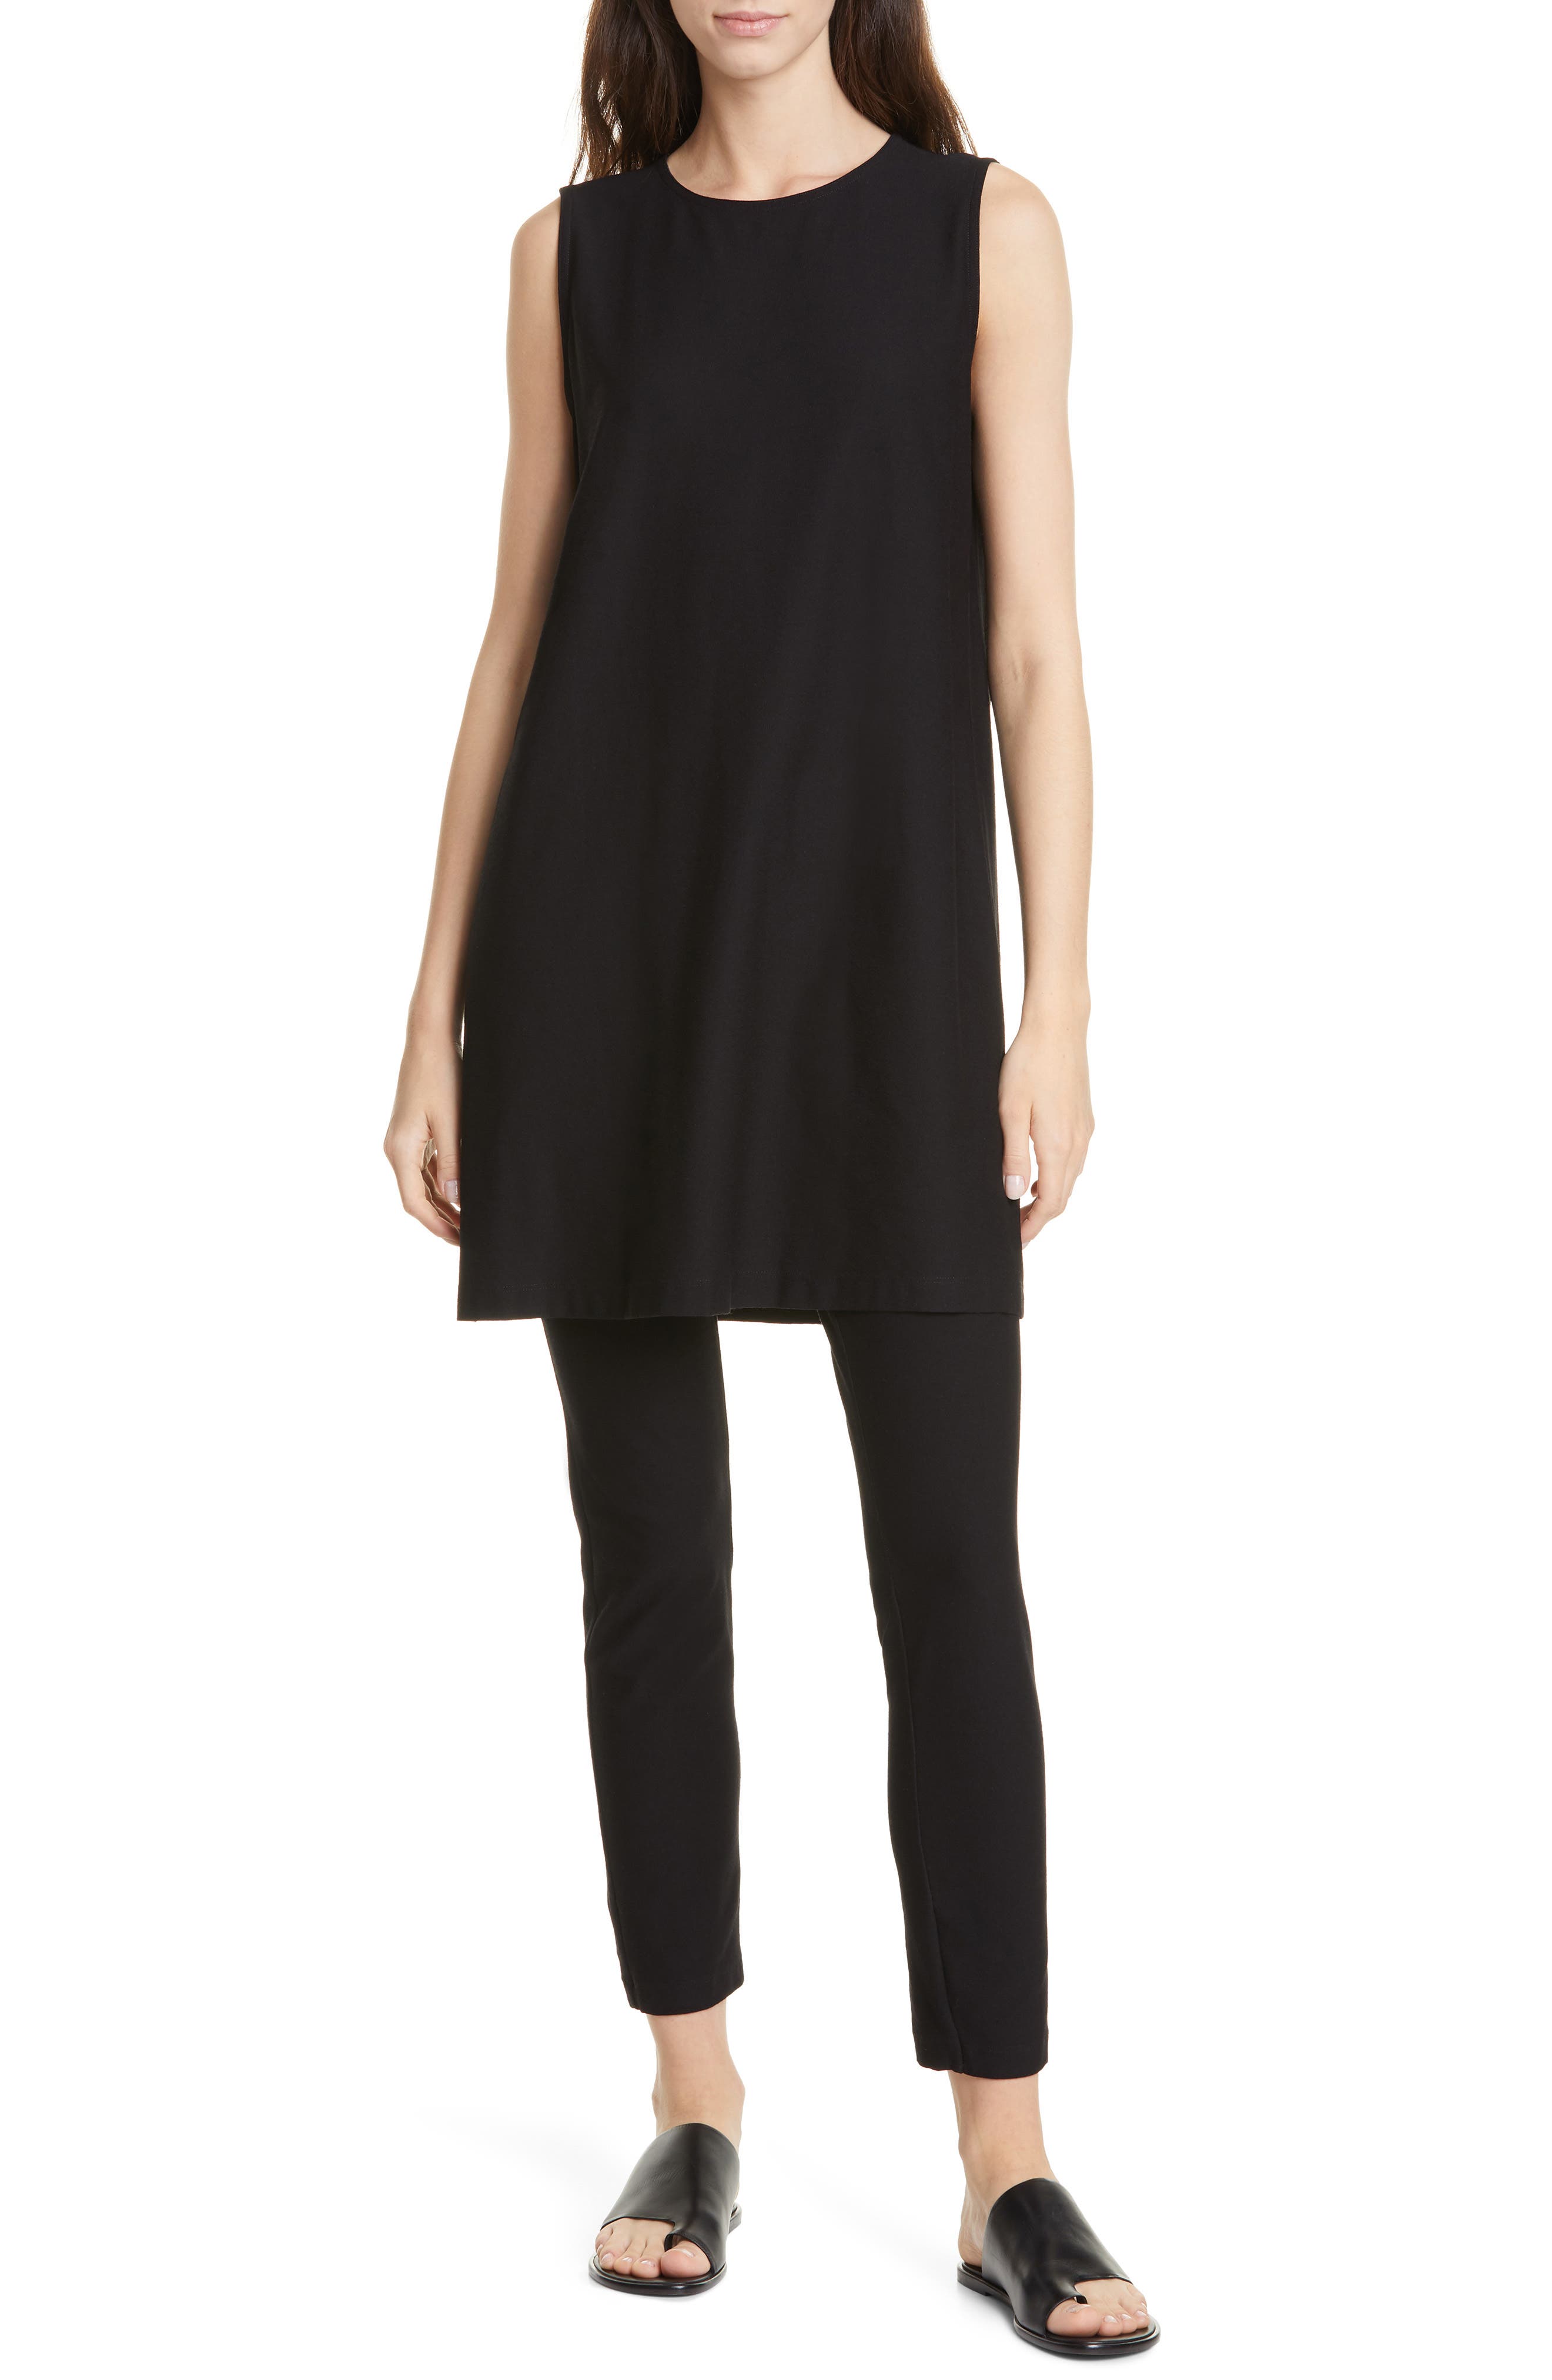 Eileen Fisher Shift Dress in Black at Nordstrom